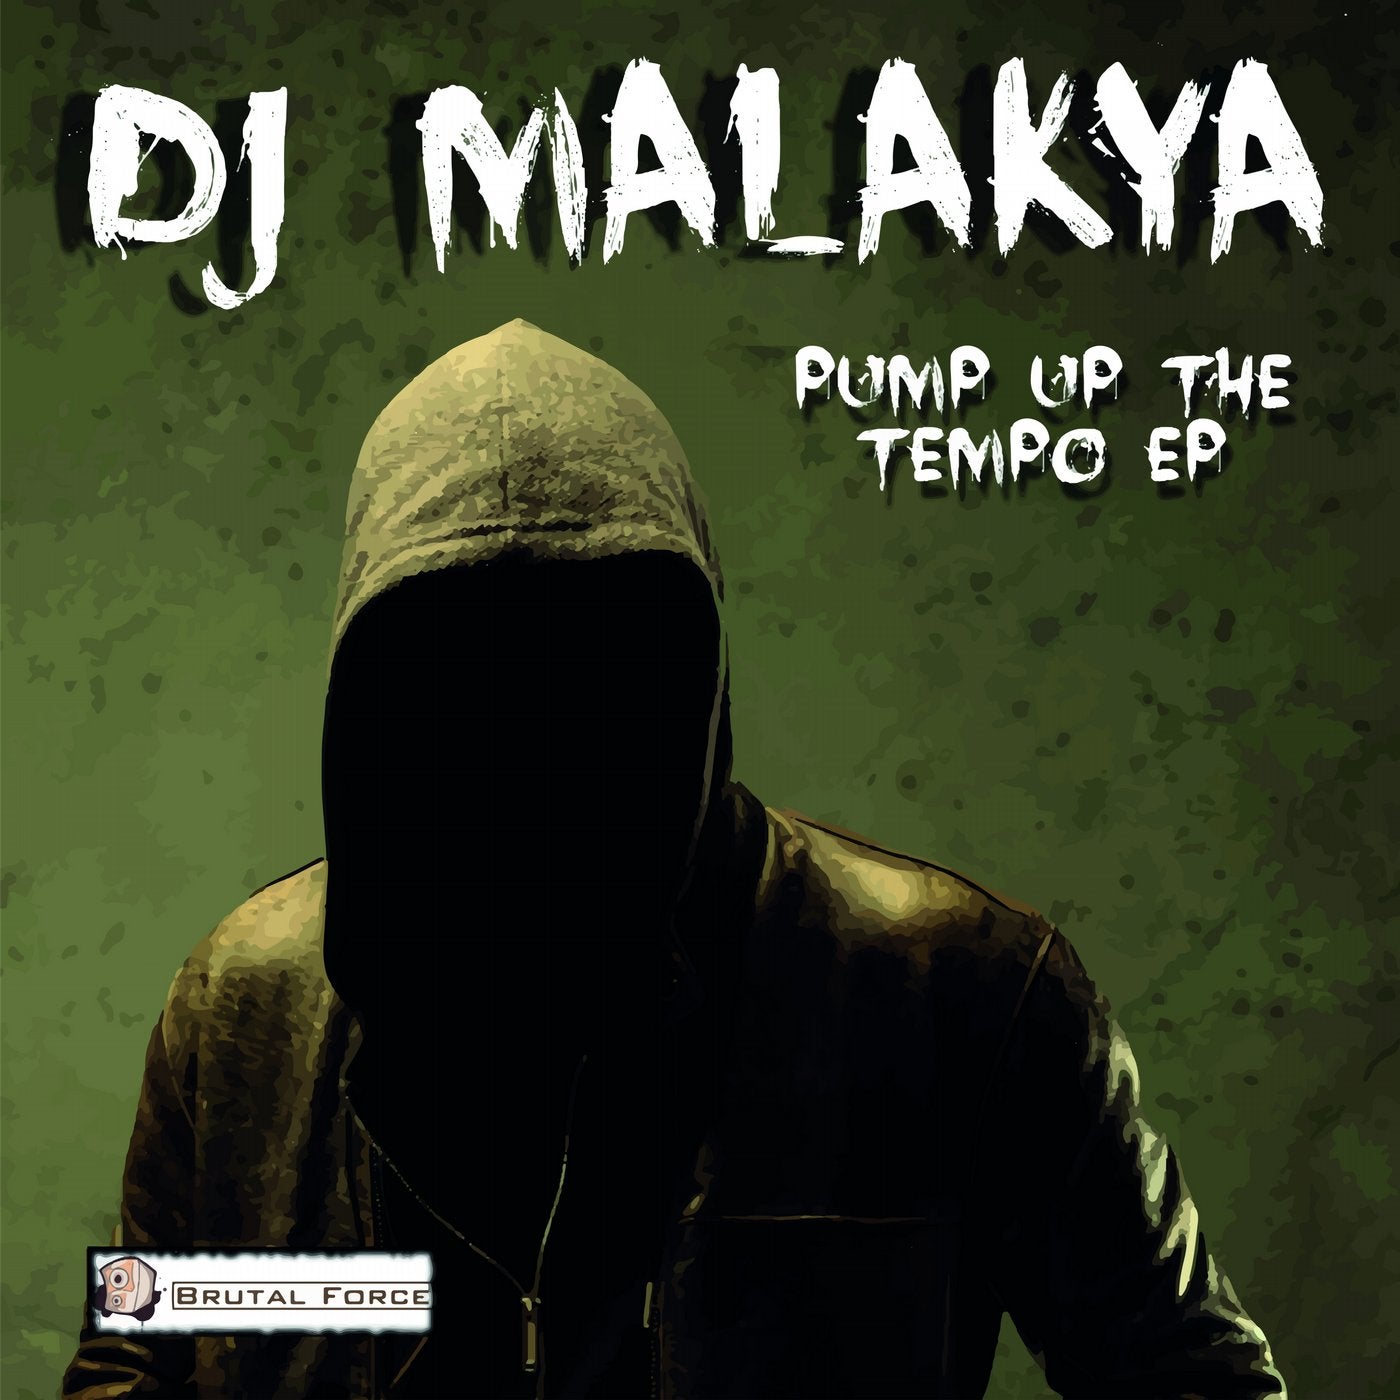 Pump up the Tempo EP